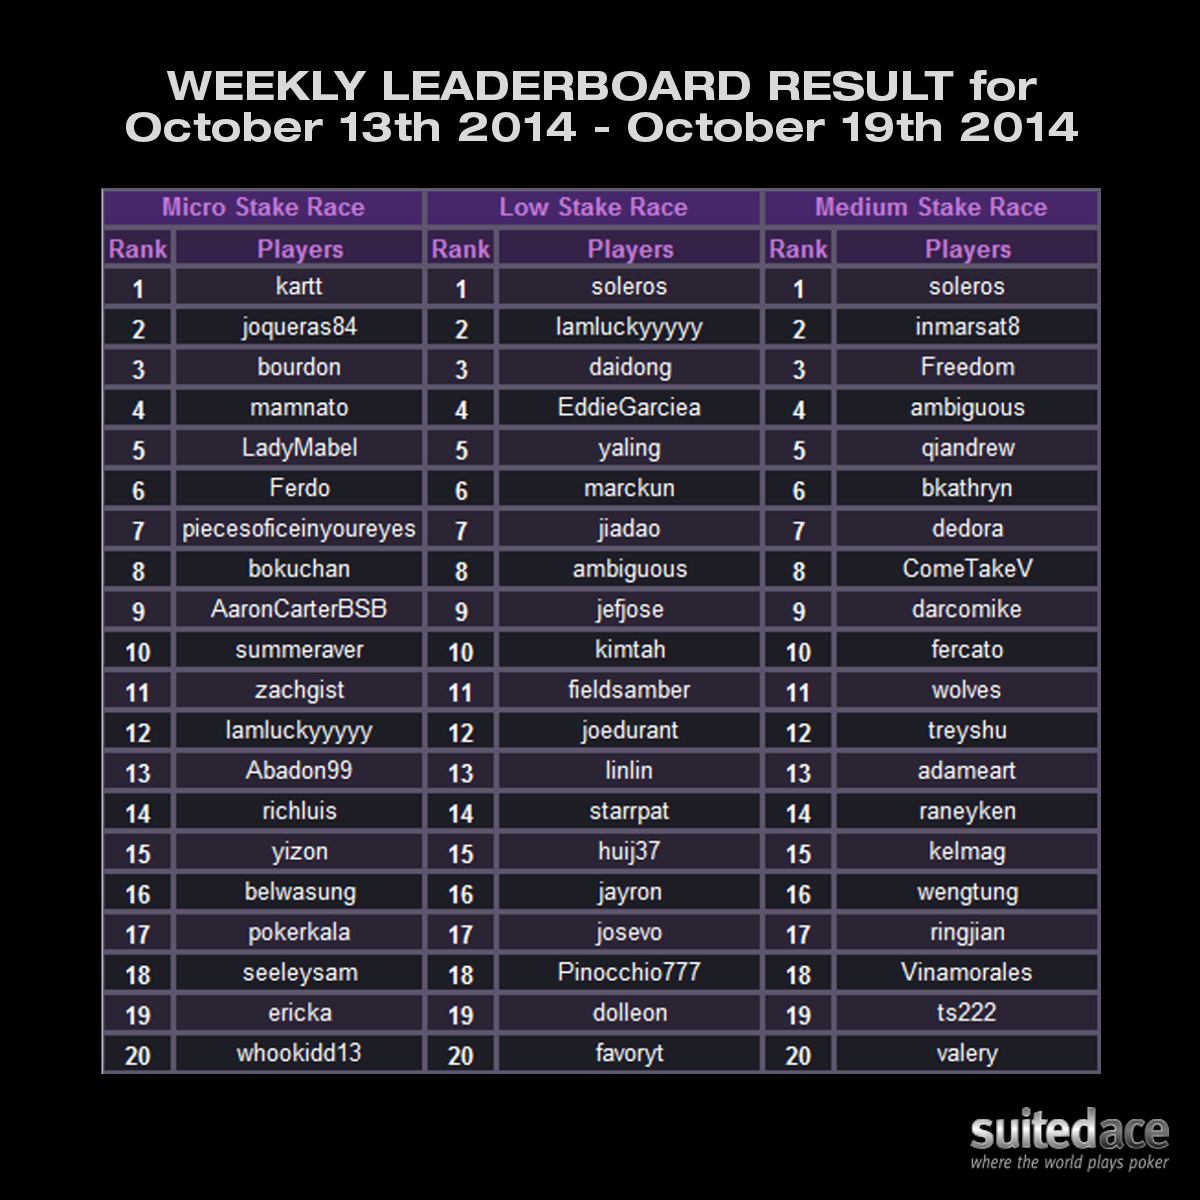 Weekly Leaderboard Result for October 13th 2014 - October 19th 2014